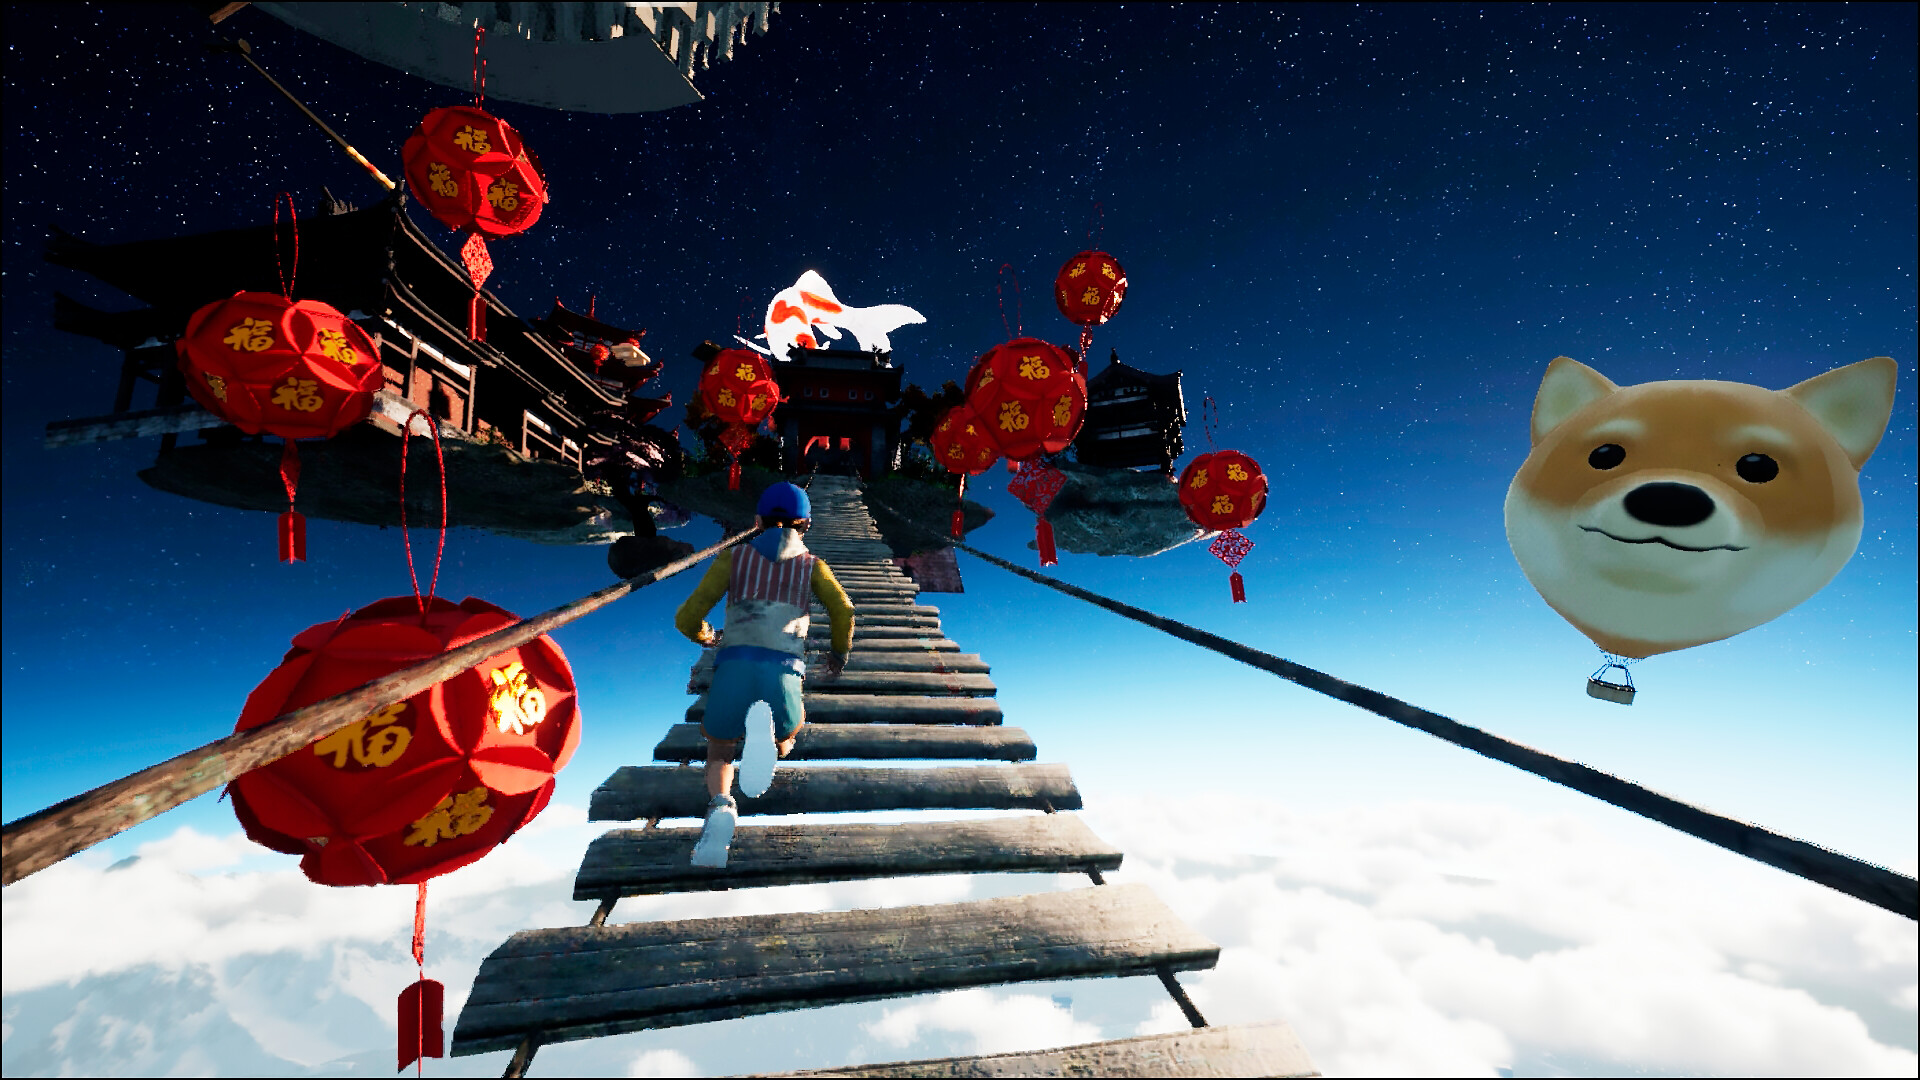 Only Up! (Sumber gambar: Steam)